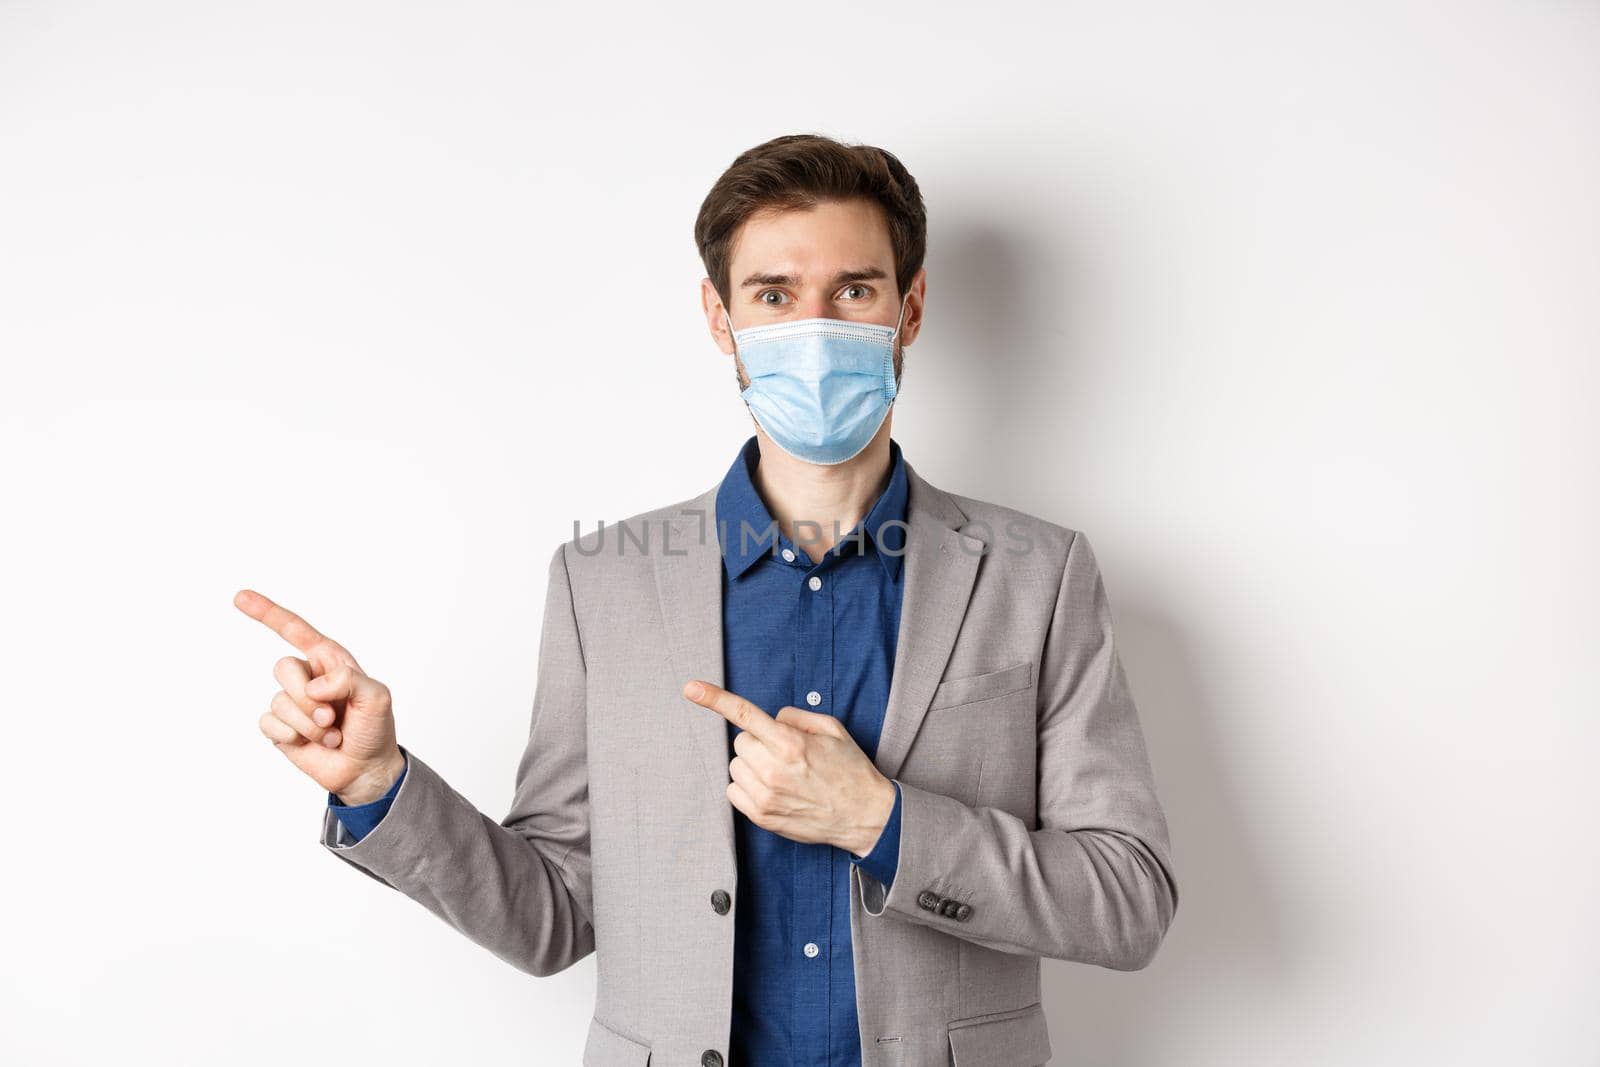 Smiling businessman in suit and medical mask showing advertisement, pointing fingers left and looking friendly, white background. Covid-19 and pandemic concept.